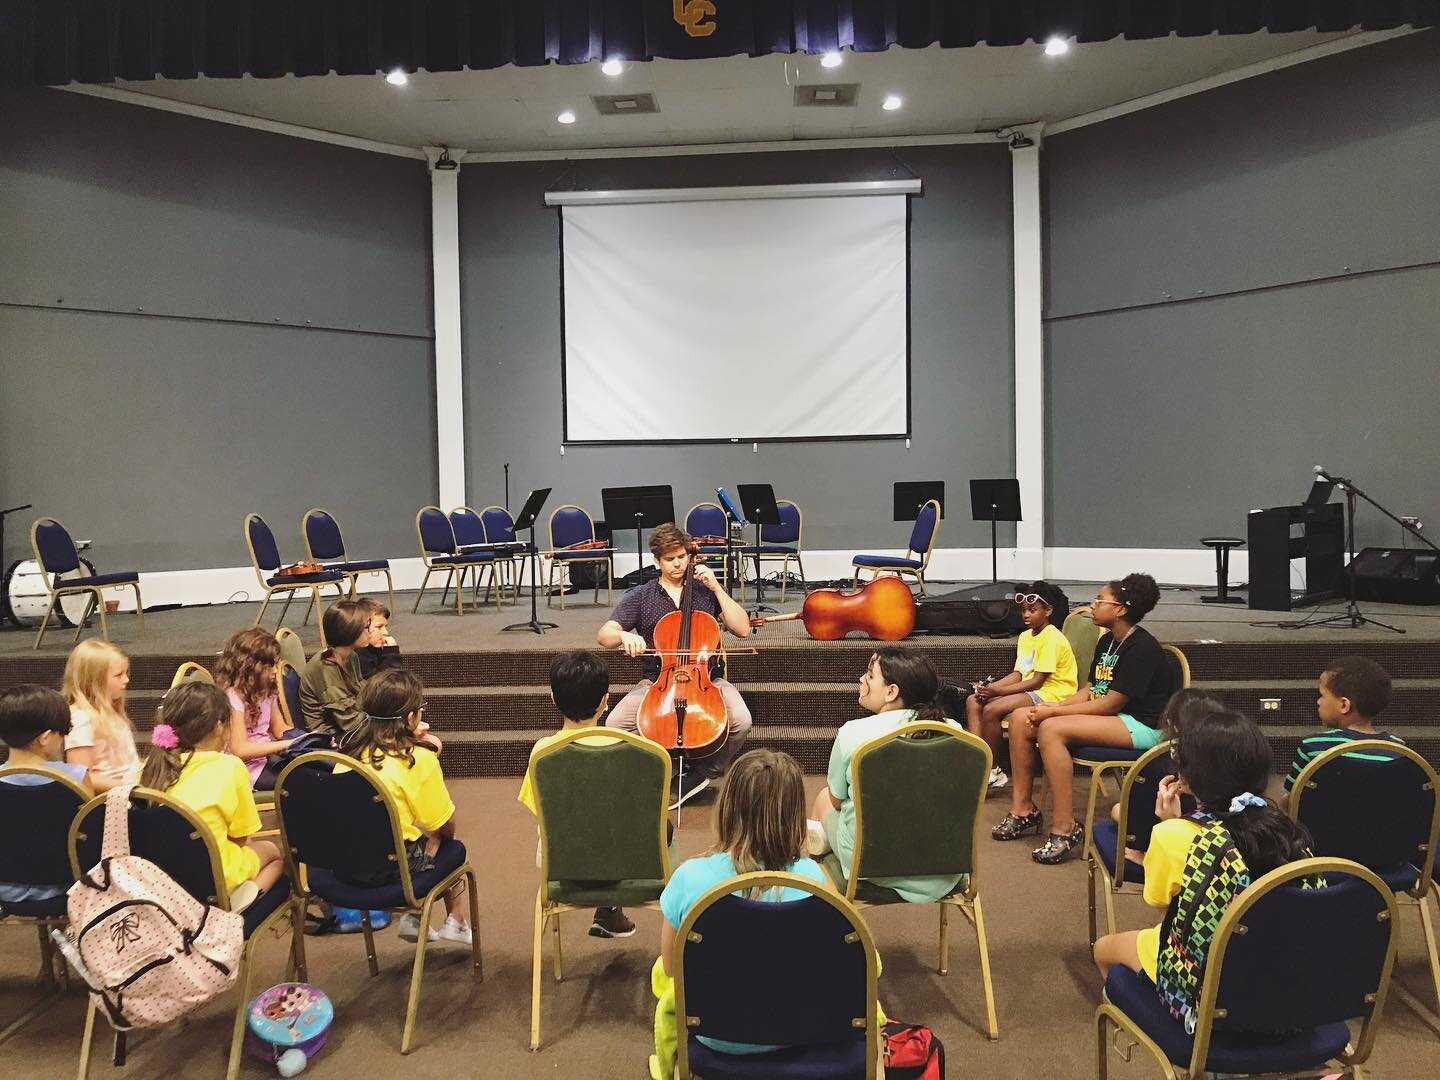 What a treat to have cellist Jake Fowler perform for us today! #cello #musiceducation #stringcamp #musiccamp #summercamp #neworleans